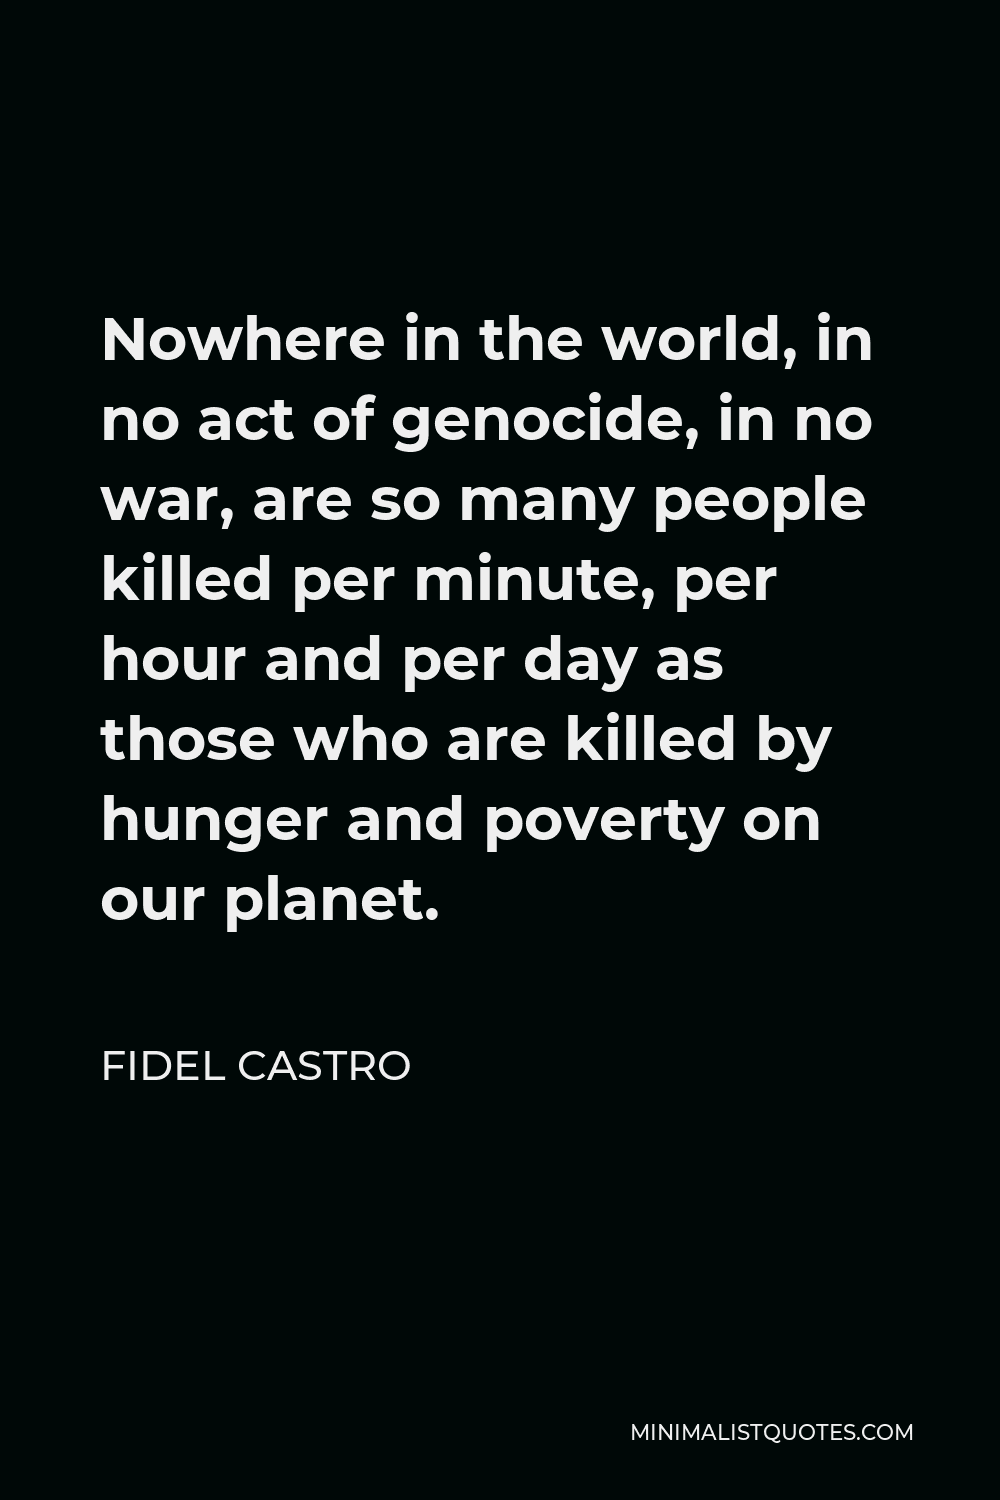 Fidel Castro Quote - Nowhere in the world, in no act of genocide, in no war, are so many people killed per minute, per hour and per day as those who are killed by hunger and poverty on our planet.